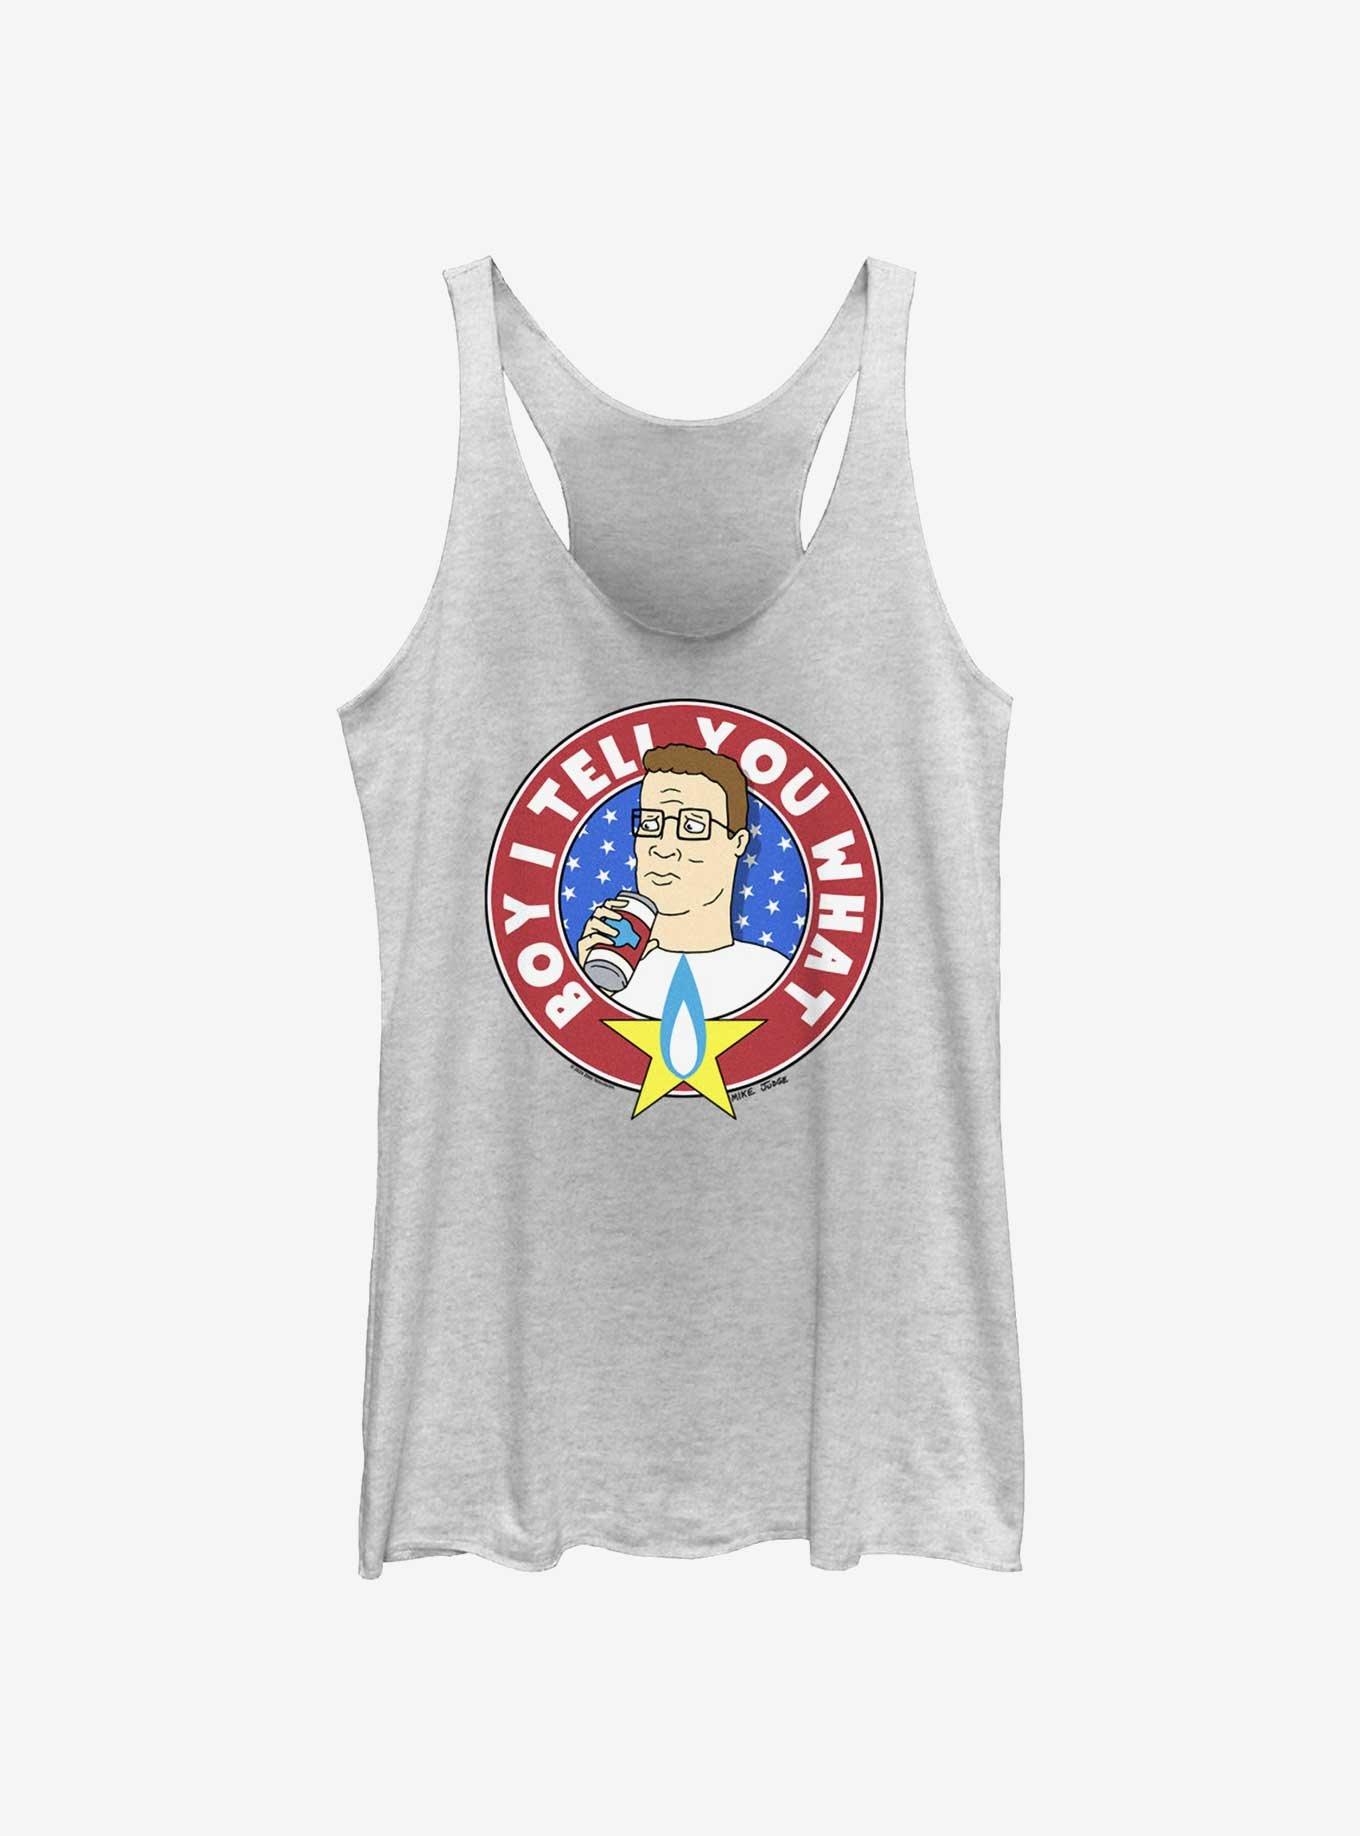 King of the Hill Hank Boy Tell You What Girls Tank, WHITE HTR, hi-res